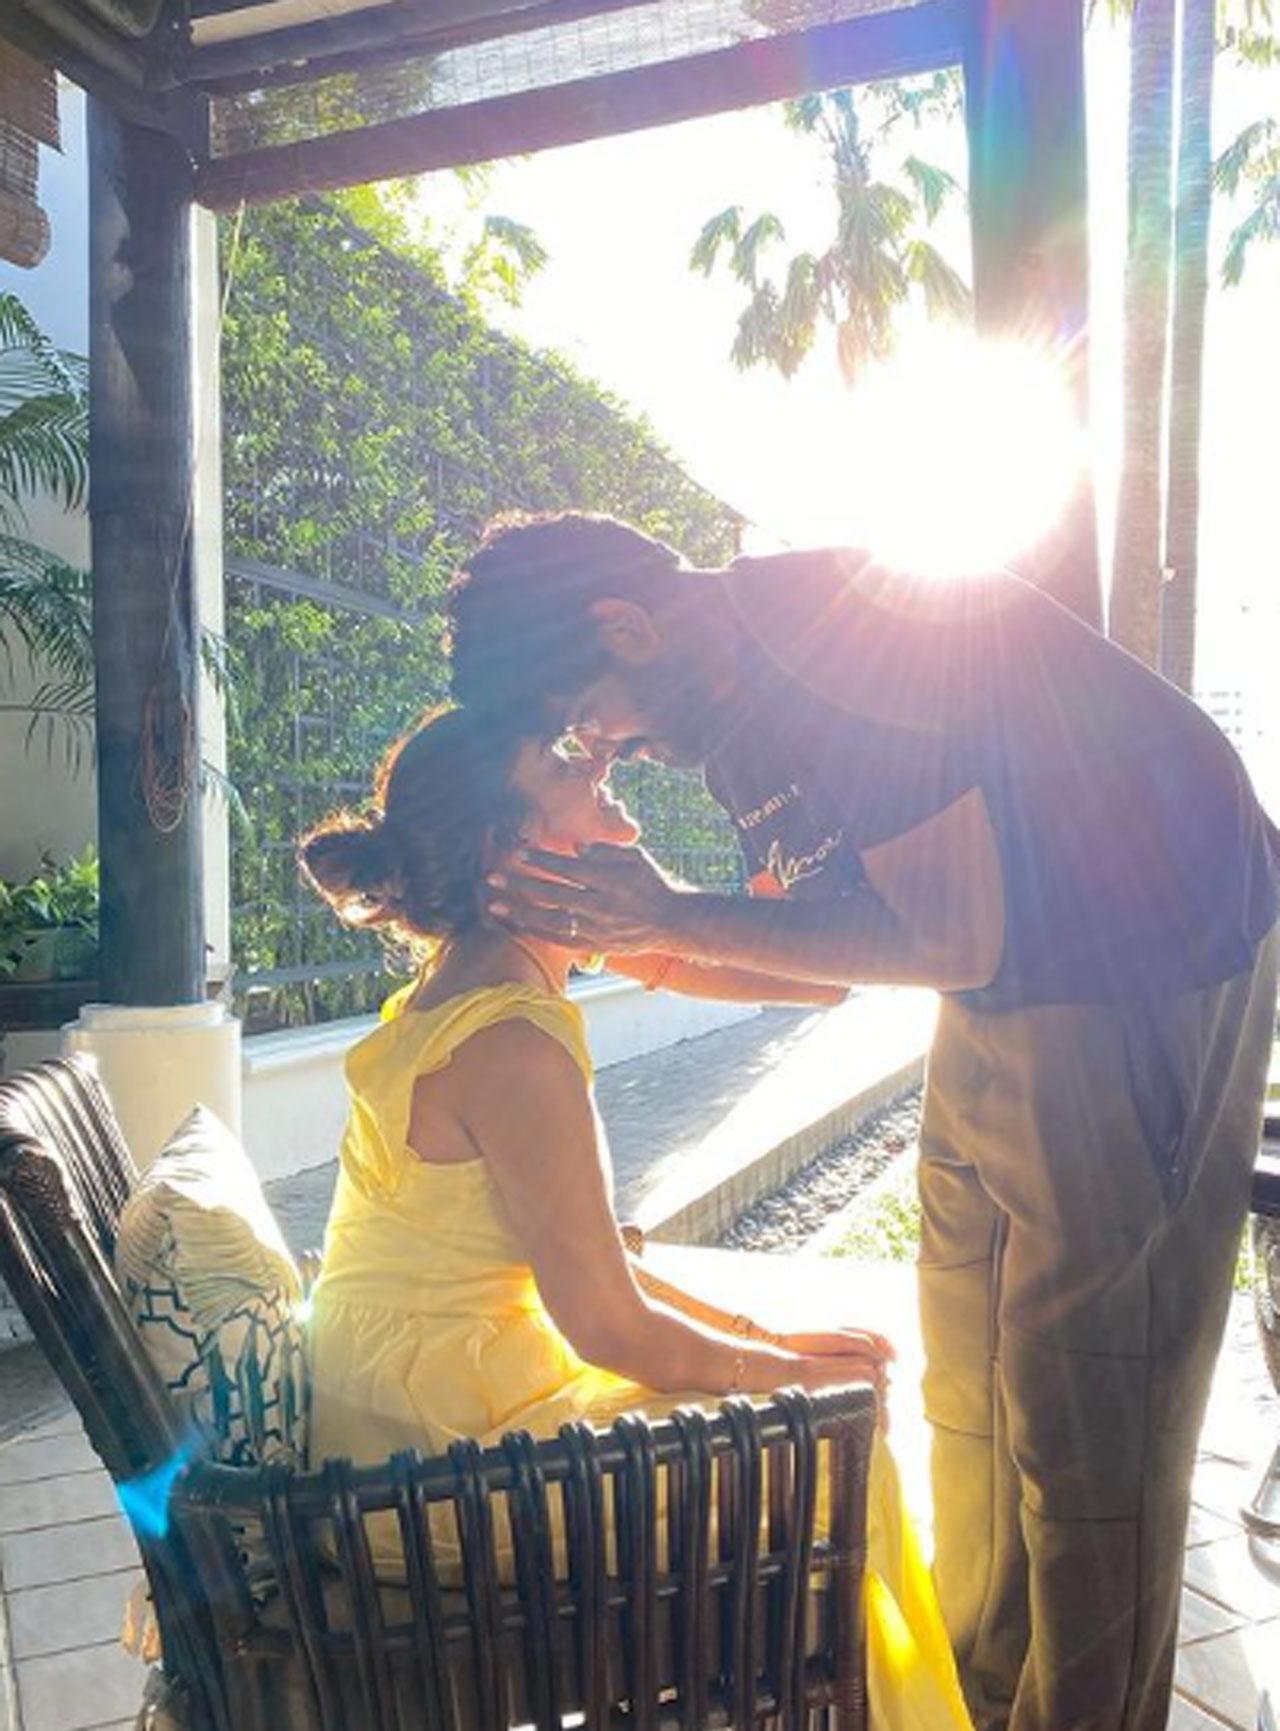 Newlyweds Vignesh Shivan and Nayanthara are currently on a dreamy honeymoon in Thailand. Taking to his Instagram, Vignesh shared some romantic pictures of the couple and netizens can't keep their eyes off it